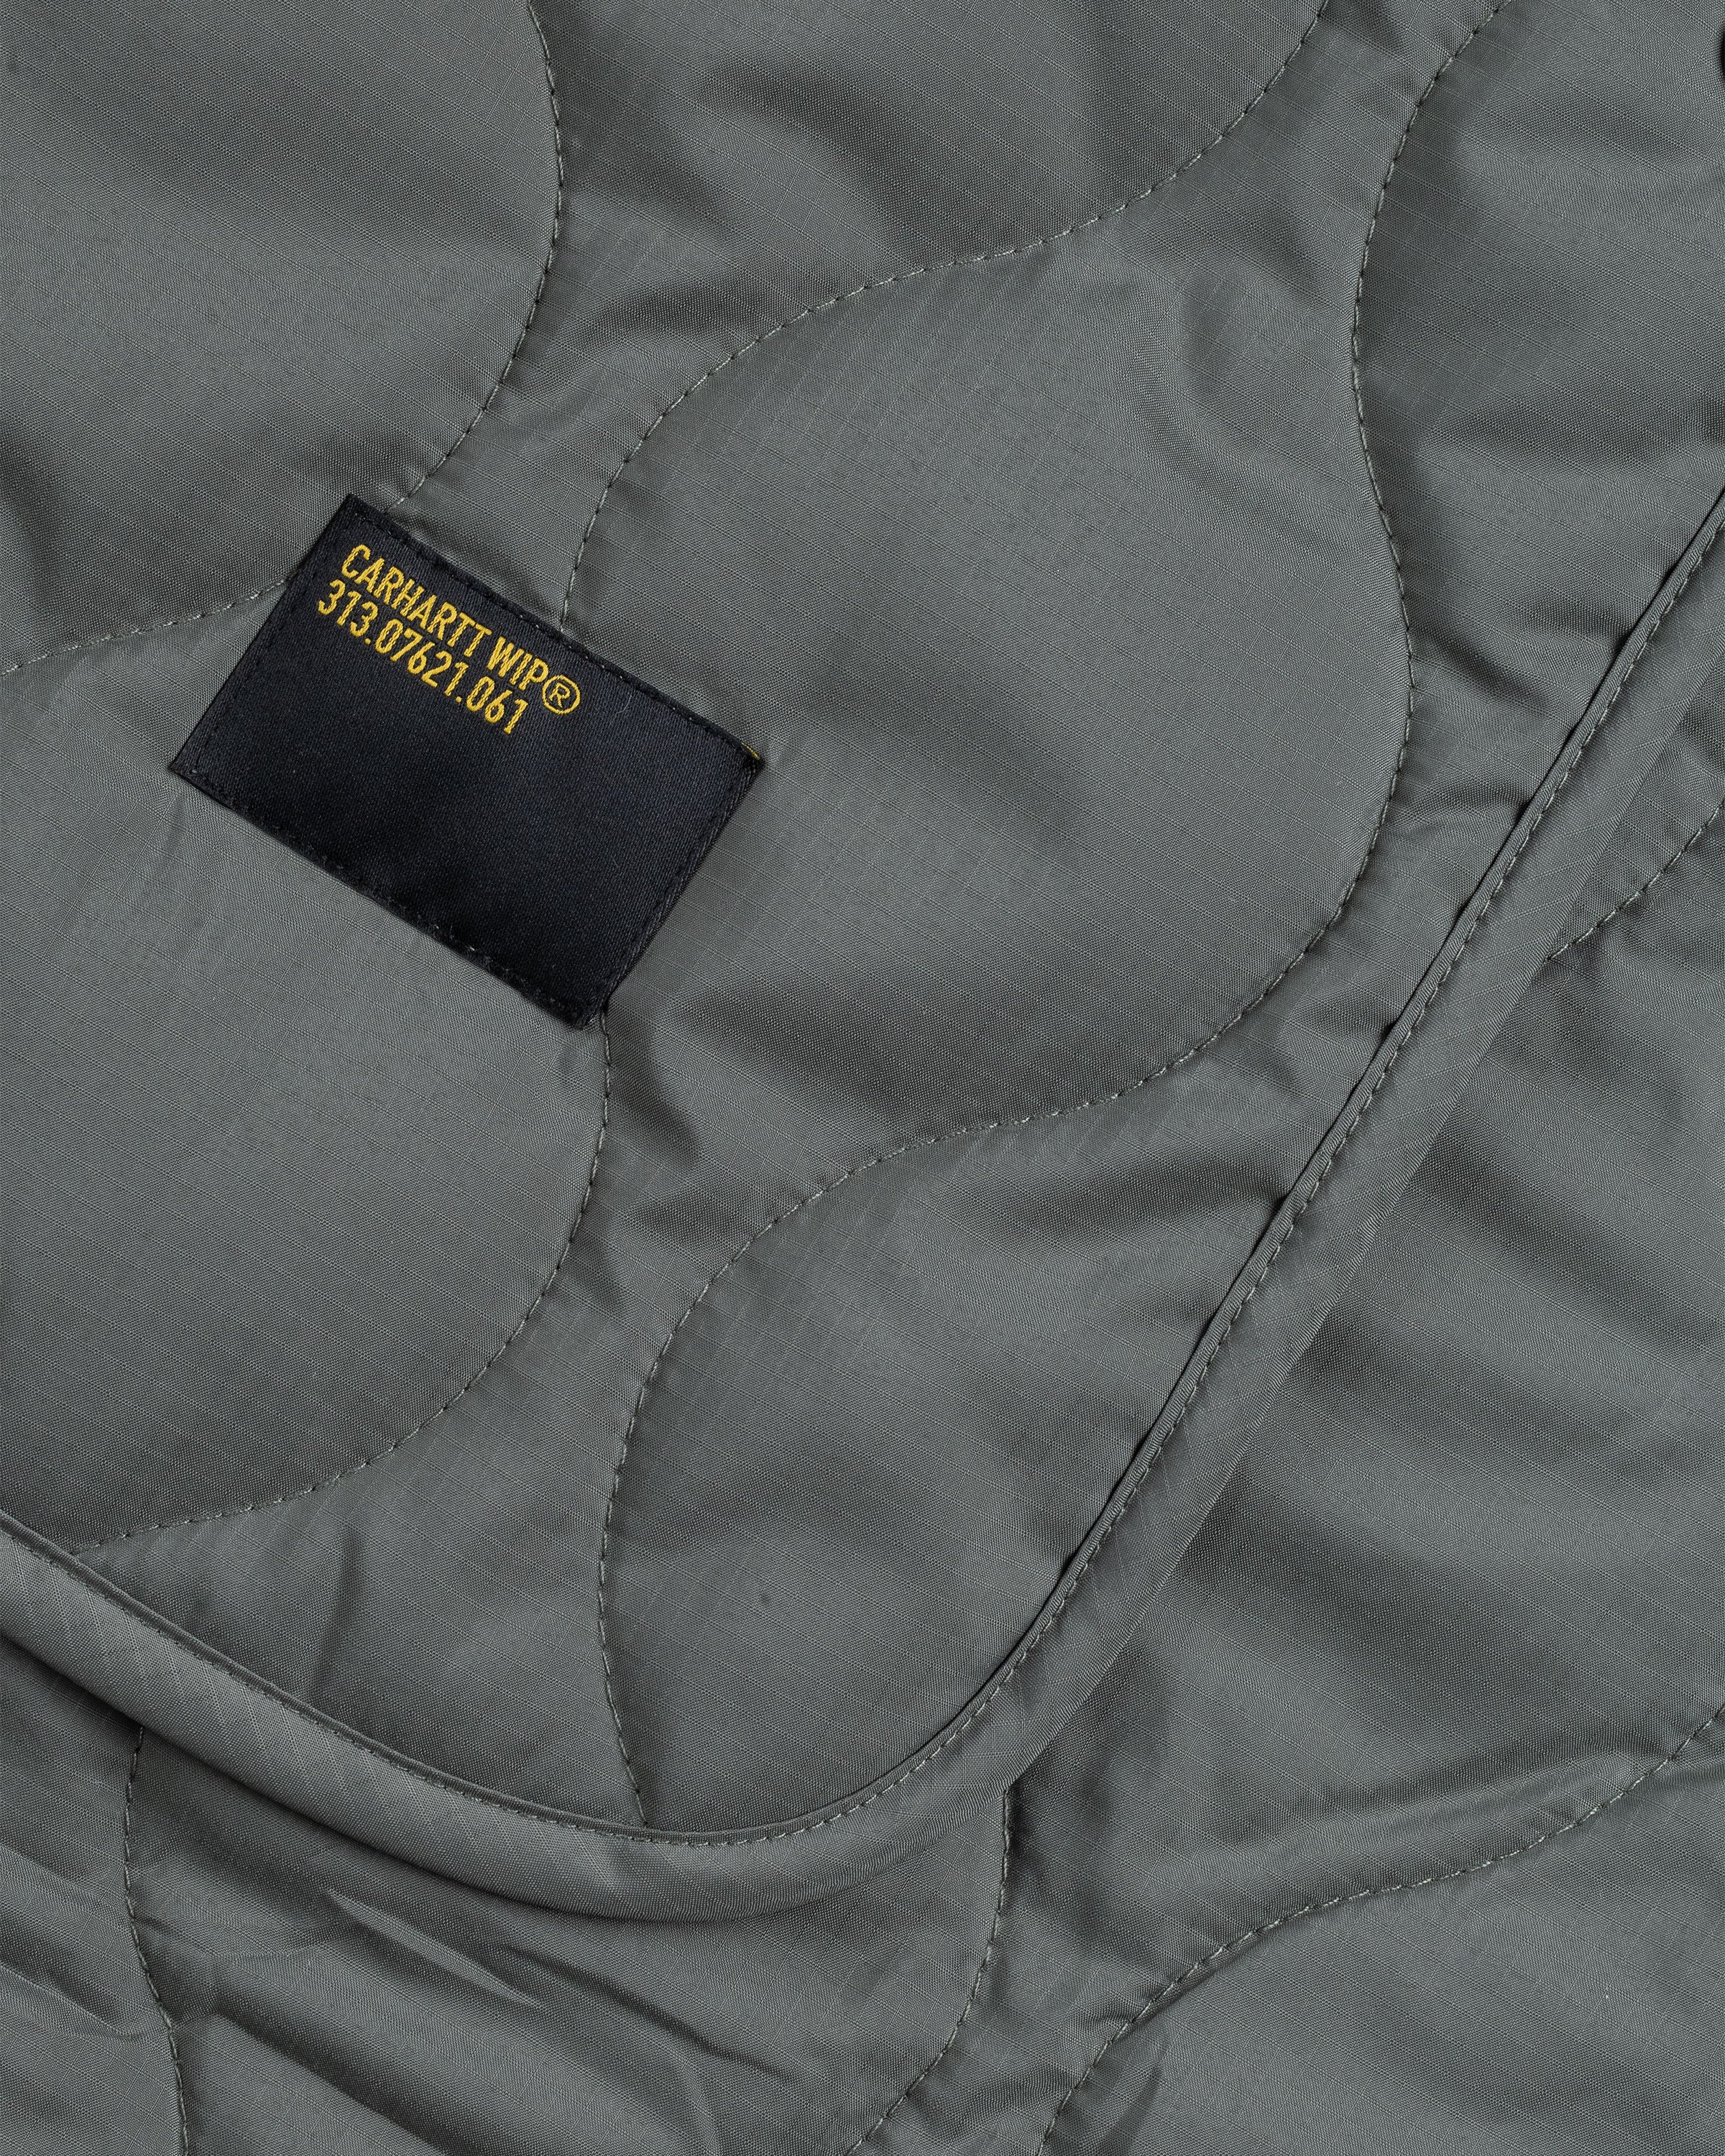 Carhartt WIP - Tour Quilted Blanket Green - Lifestyle - Green - Image 3